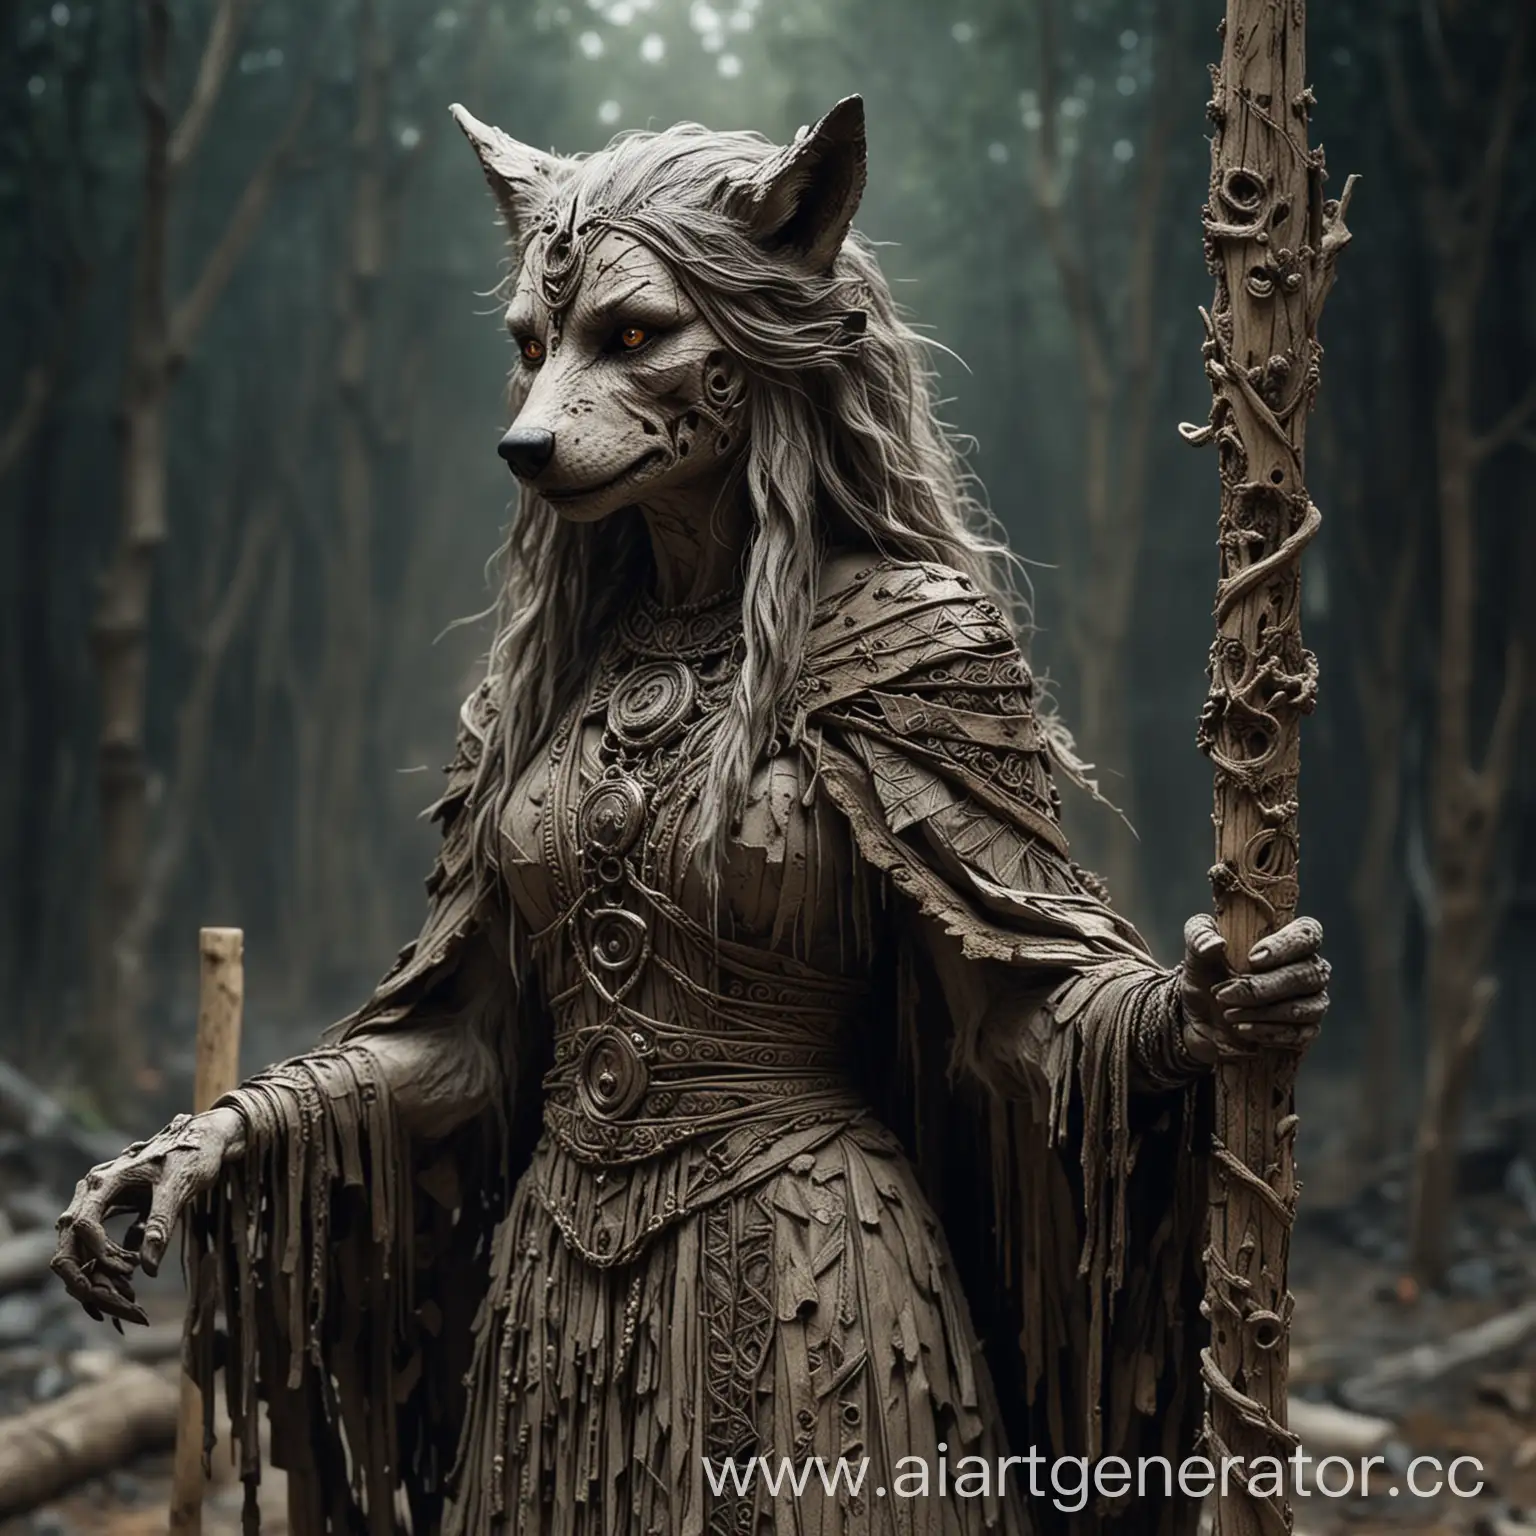 Elderly-Feral-SheWolf-Priestess-with-Intricately-Adorned-Ash-Staff